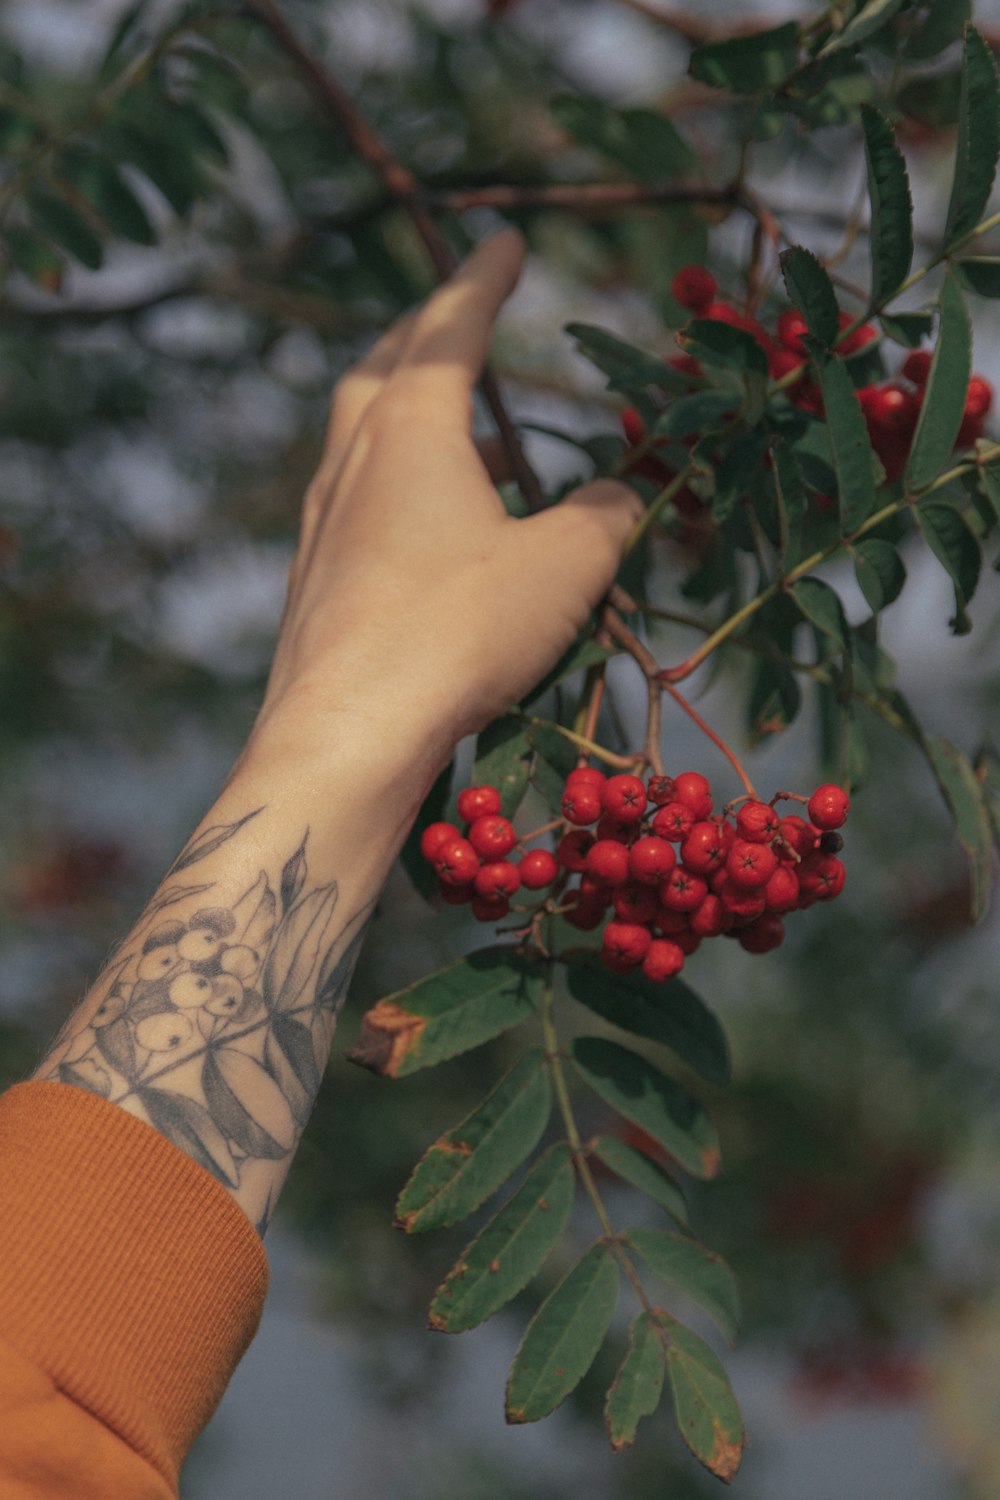 a person reaching for berries on a tree